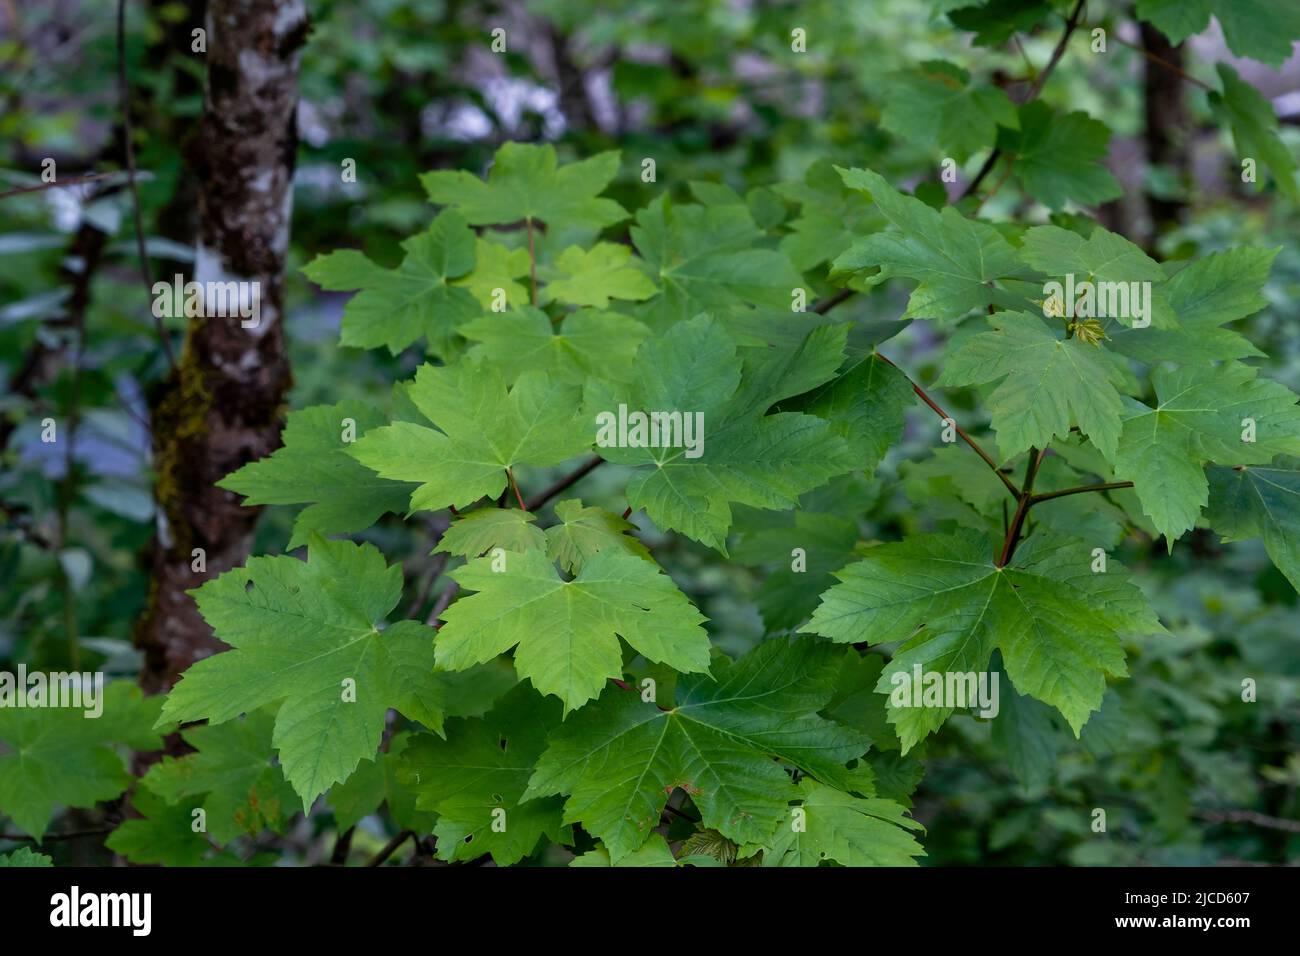 Sycamore maple (Acer pseudoplatanus) broad-leaved tree fresh green springtime new foliage Stock Photo